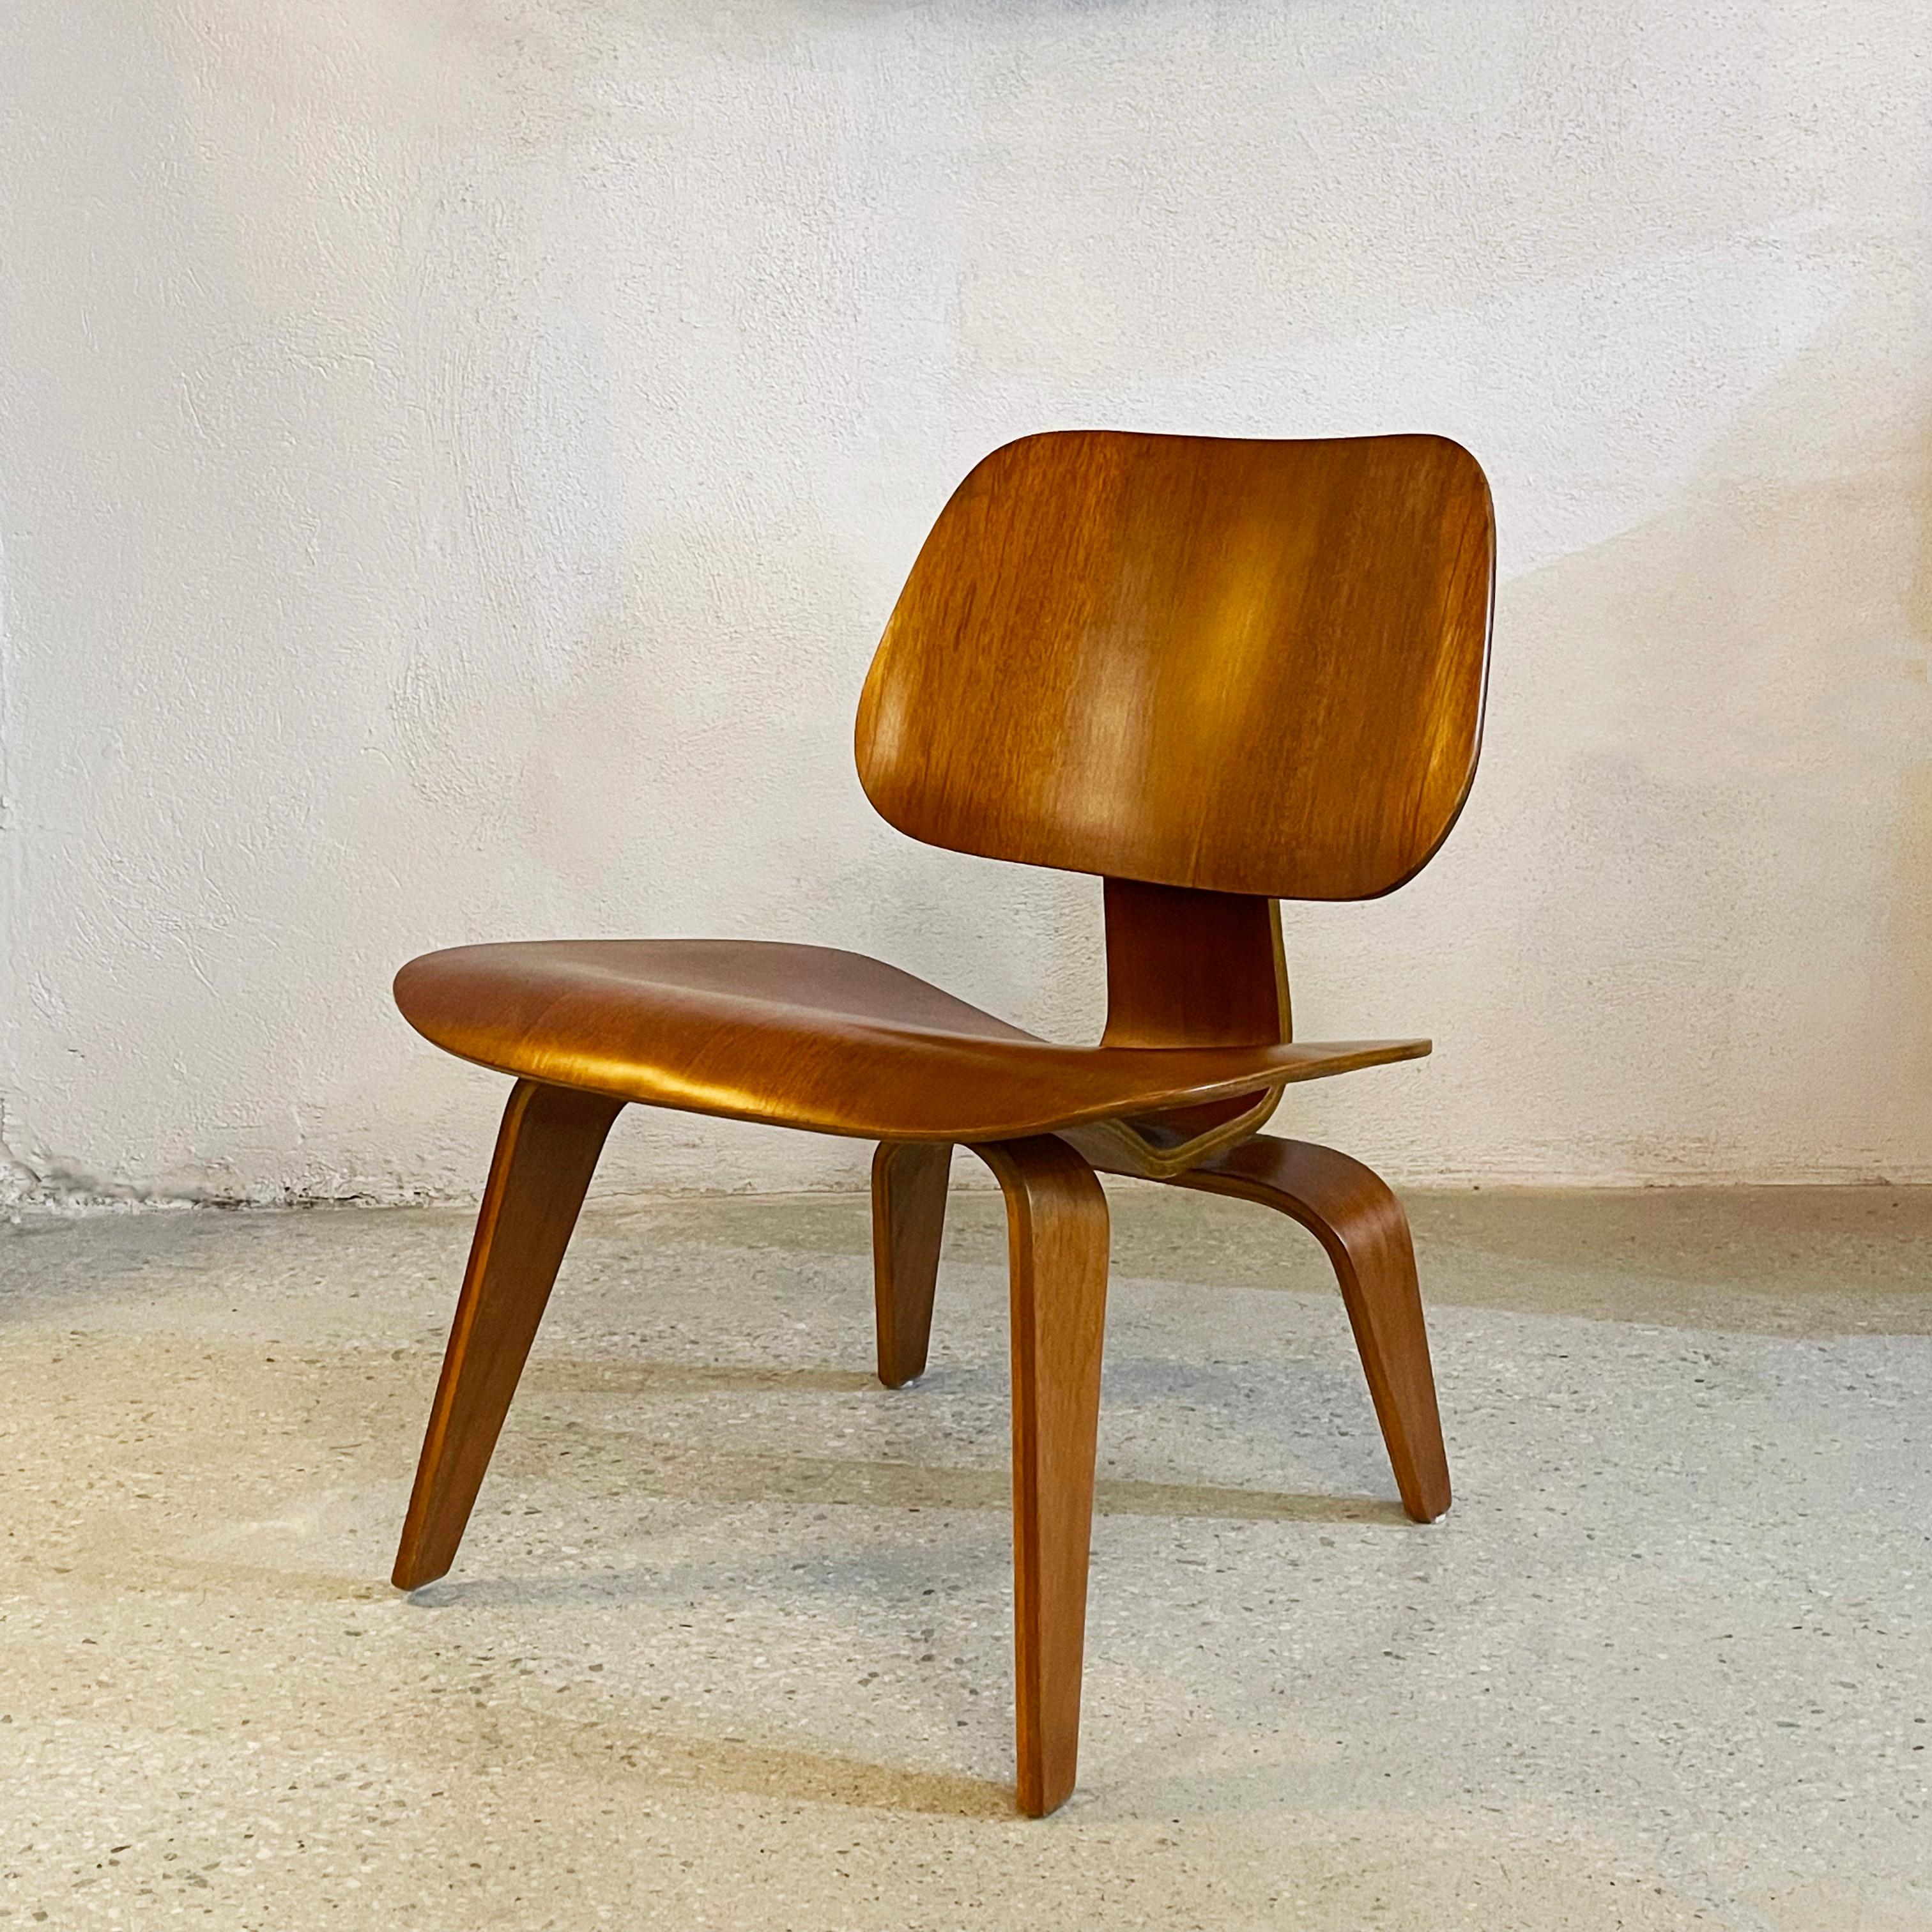 Early edition, molded birch plywood LCW, low seated easy lounge chair designed by Charles and Ray Eames for Herman Miller. The chair has the early Eames 5-2-5 screw configuration indicating it's circa late 1940's. No label is present. This organic,